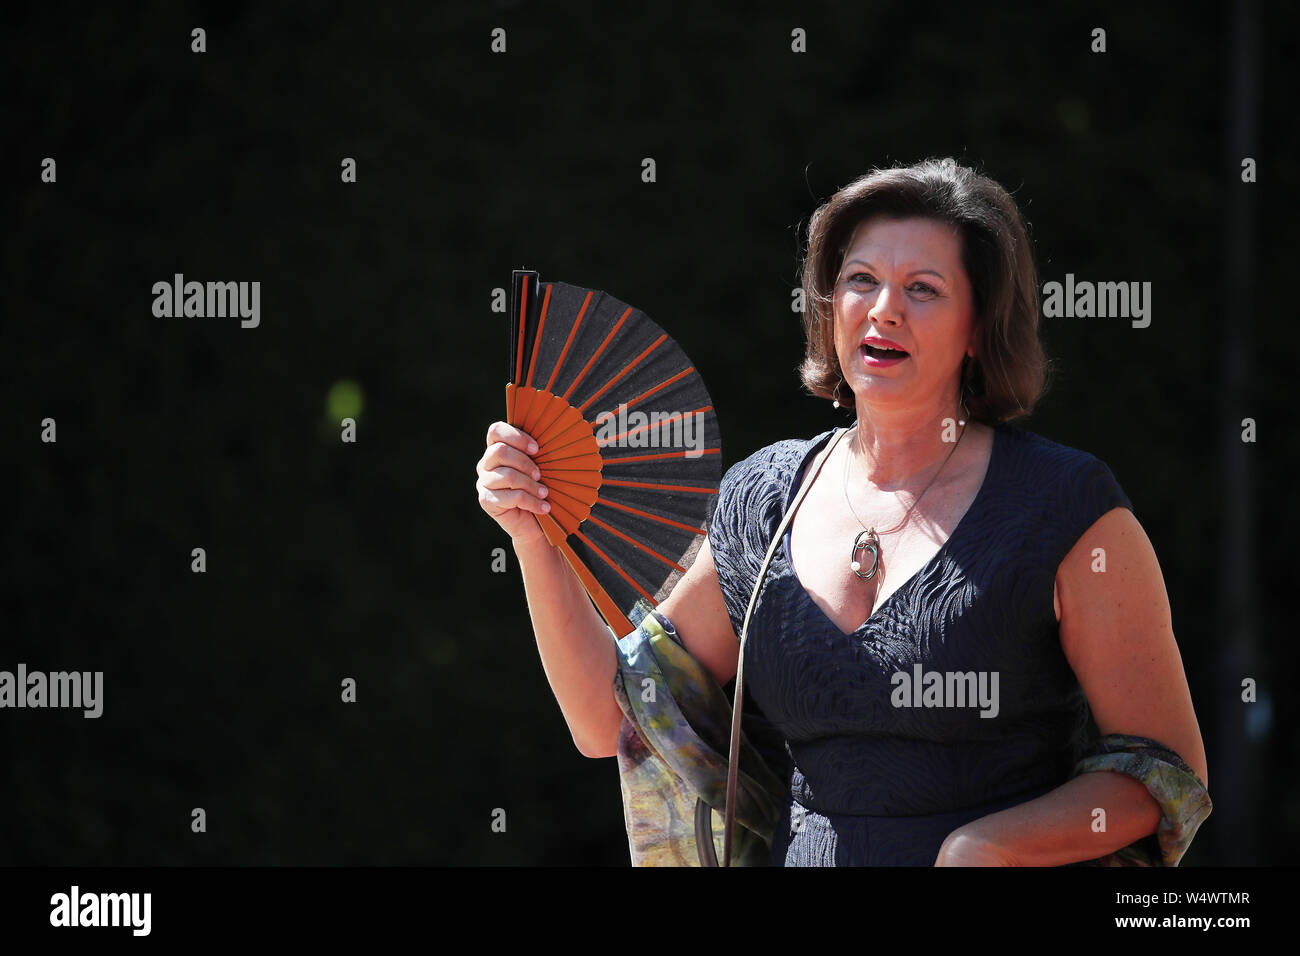 Bayreuth, Germany. 25th July, 2019. Ilse Aigner (CSU), President of the  Bavarian Parliament, comes to the beginning of the Bayreuth Festival 2019  and holds a fan against the heat. The Richard Wagner